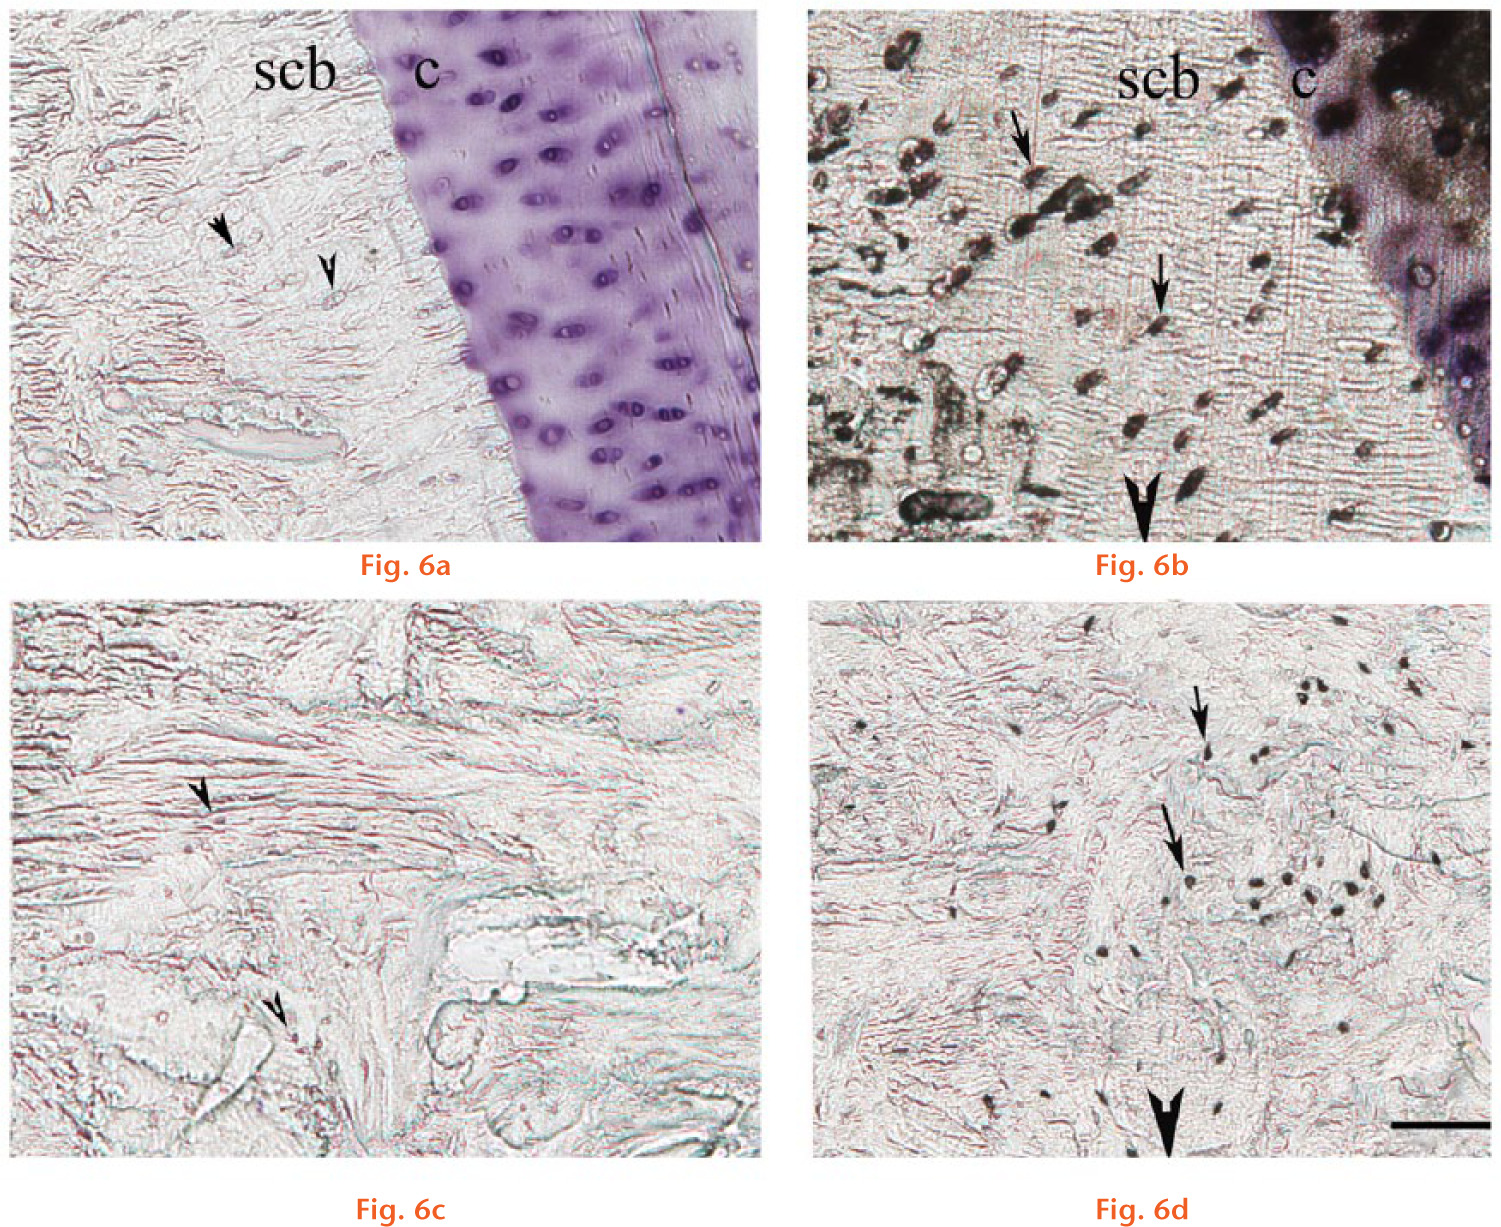  
            Representative photomicrographs of sclerostin immunohistochemistry: a) subchondral bone area control sample; b) subchondral area fracture sample; c) deep zone control sample; and d) deep zone fracture sample. Osteocytes – arrowheads in a) and c) – stained positively for sclerostin are seen as black cells in b) and d) (Group F) and are shown by black arrows. In a), the cartilage is stained with toluidine blue. Scale bar 100 μm. c, cartilage; scb, subchondral bone. The cartilage is stained with toluidine blue and is visible in a) and b). The fracture site is to the bottom of the figures in b) and d) (black arrowhead).
          